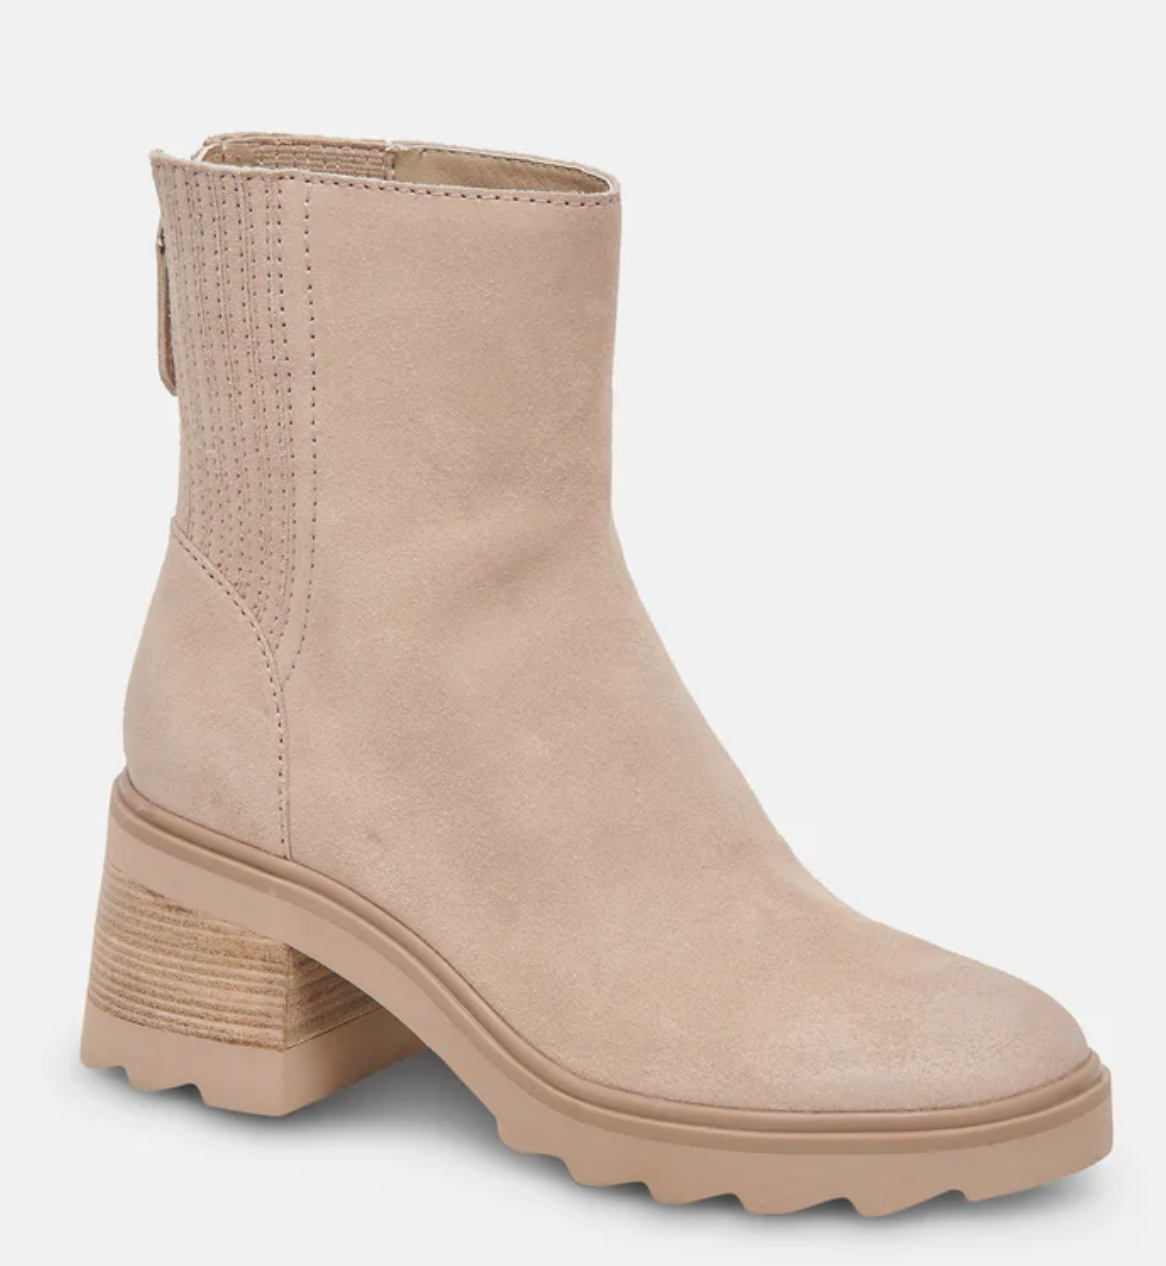 Dolce Vita Martey H20 Boots in Taupe